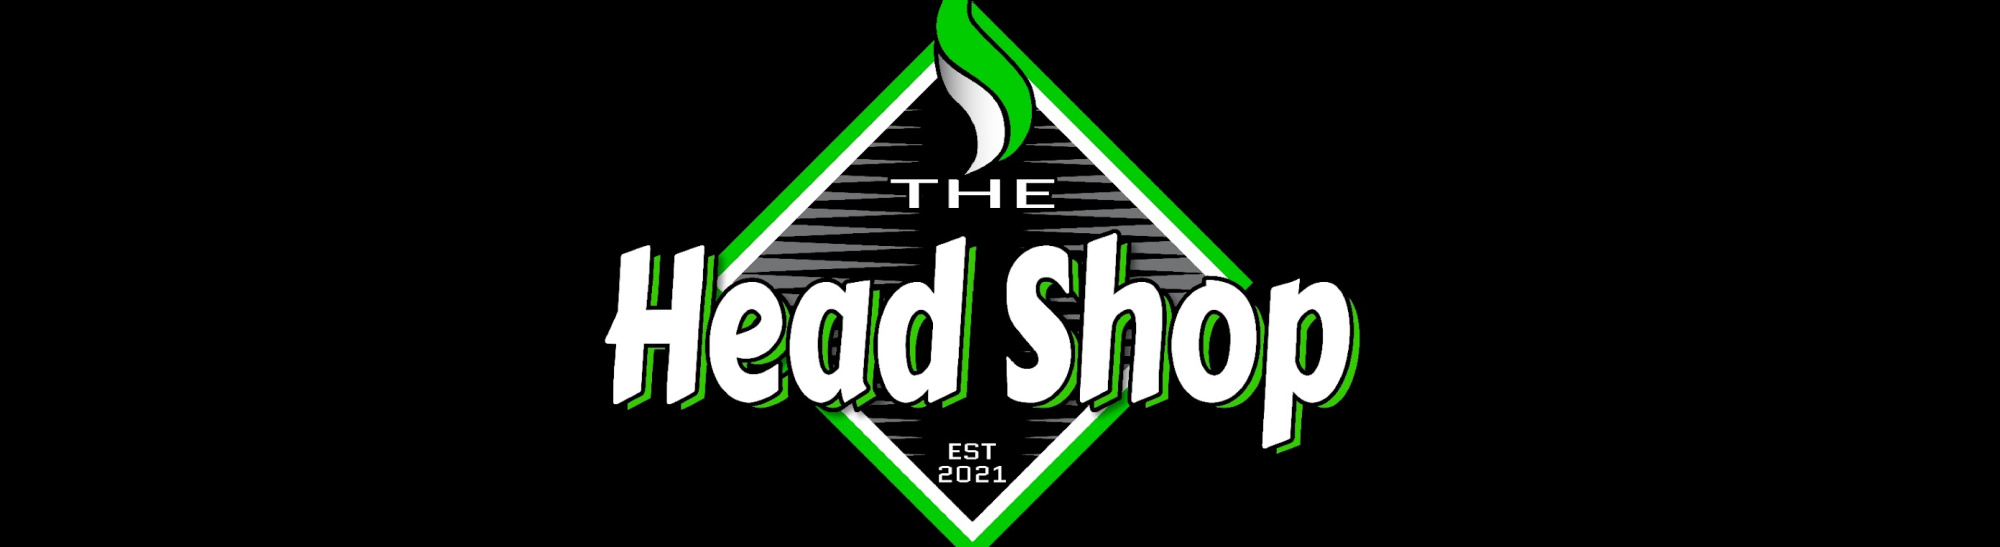 image of the headshop in rapid city sd